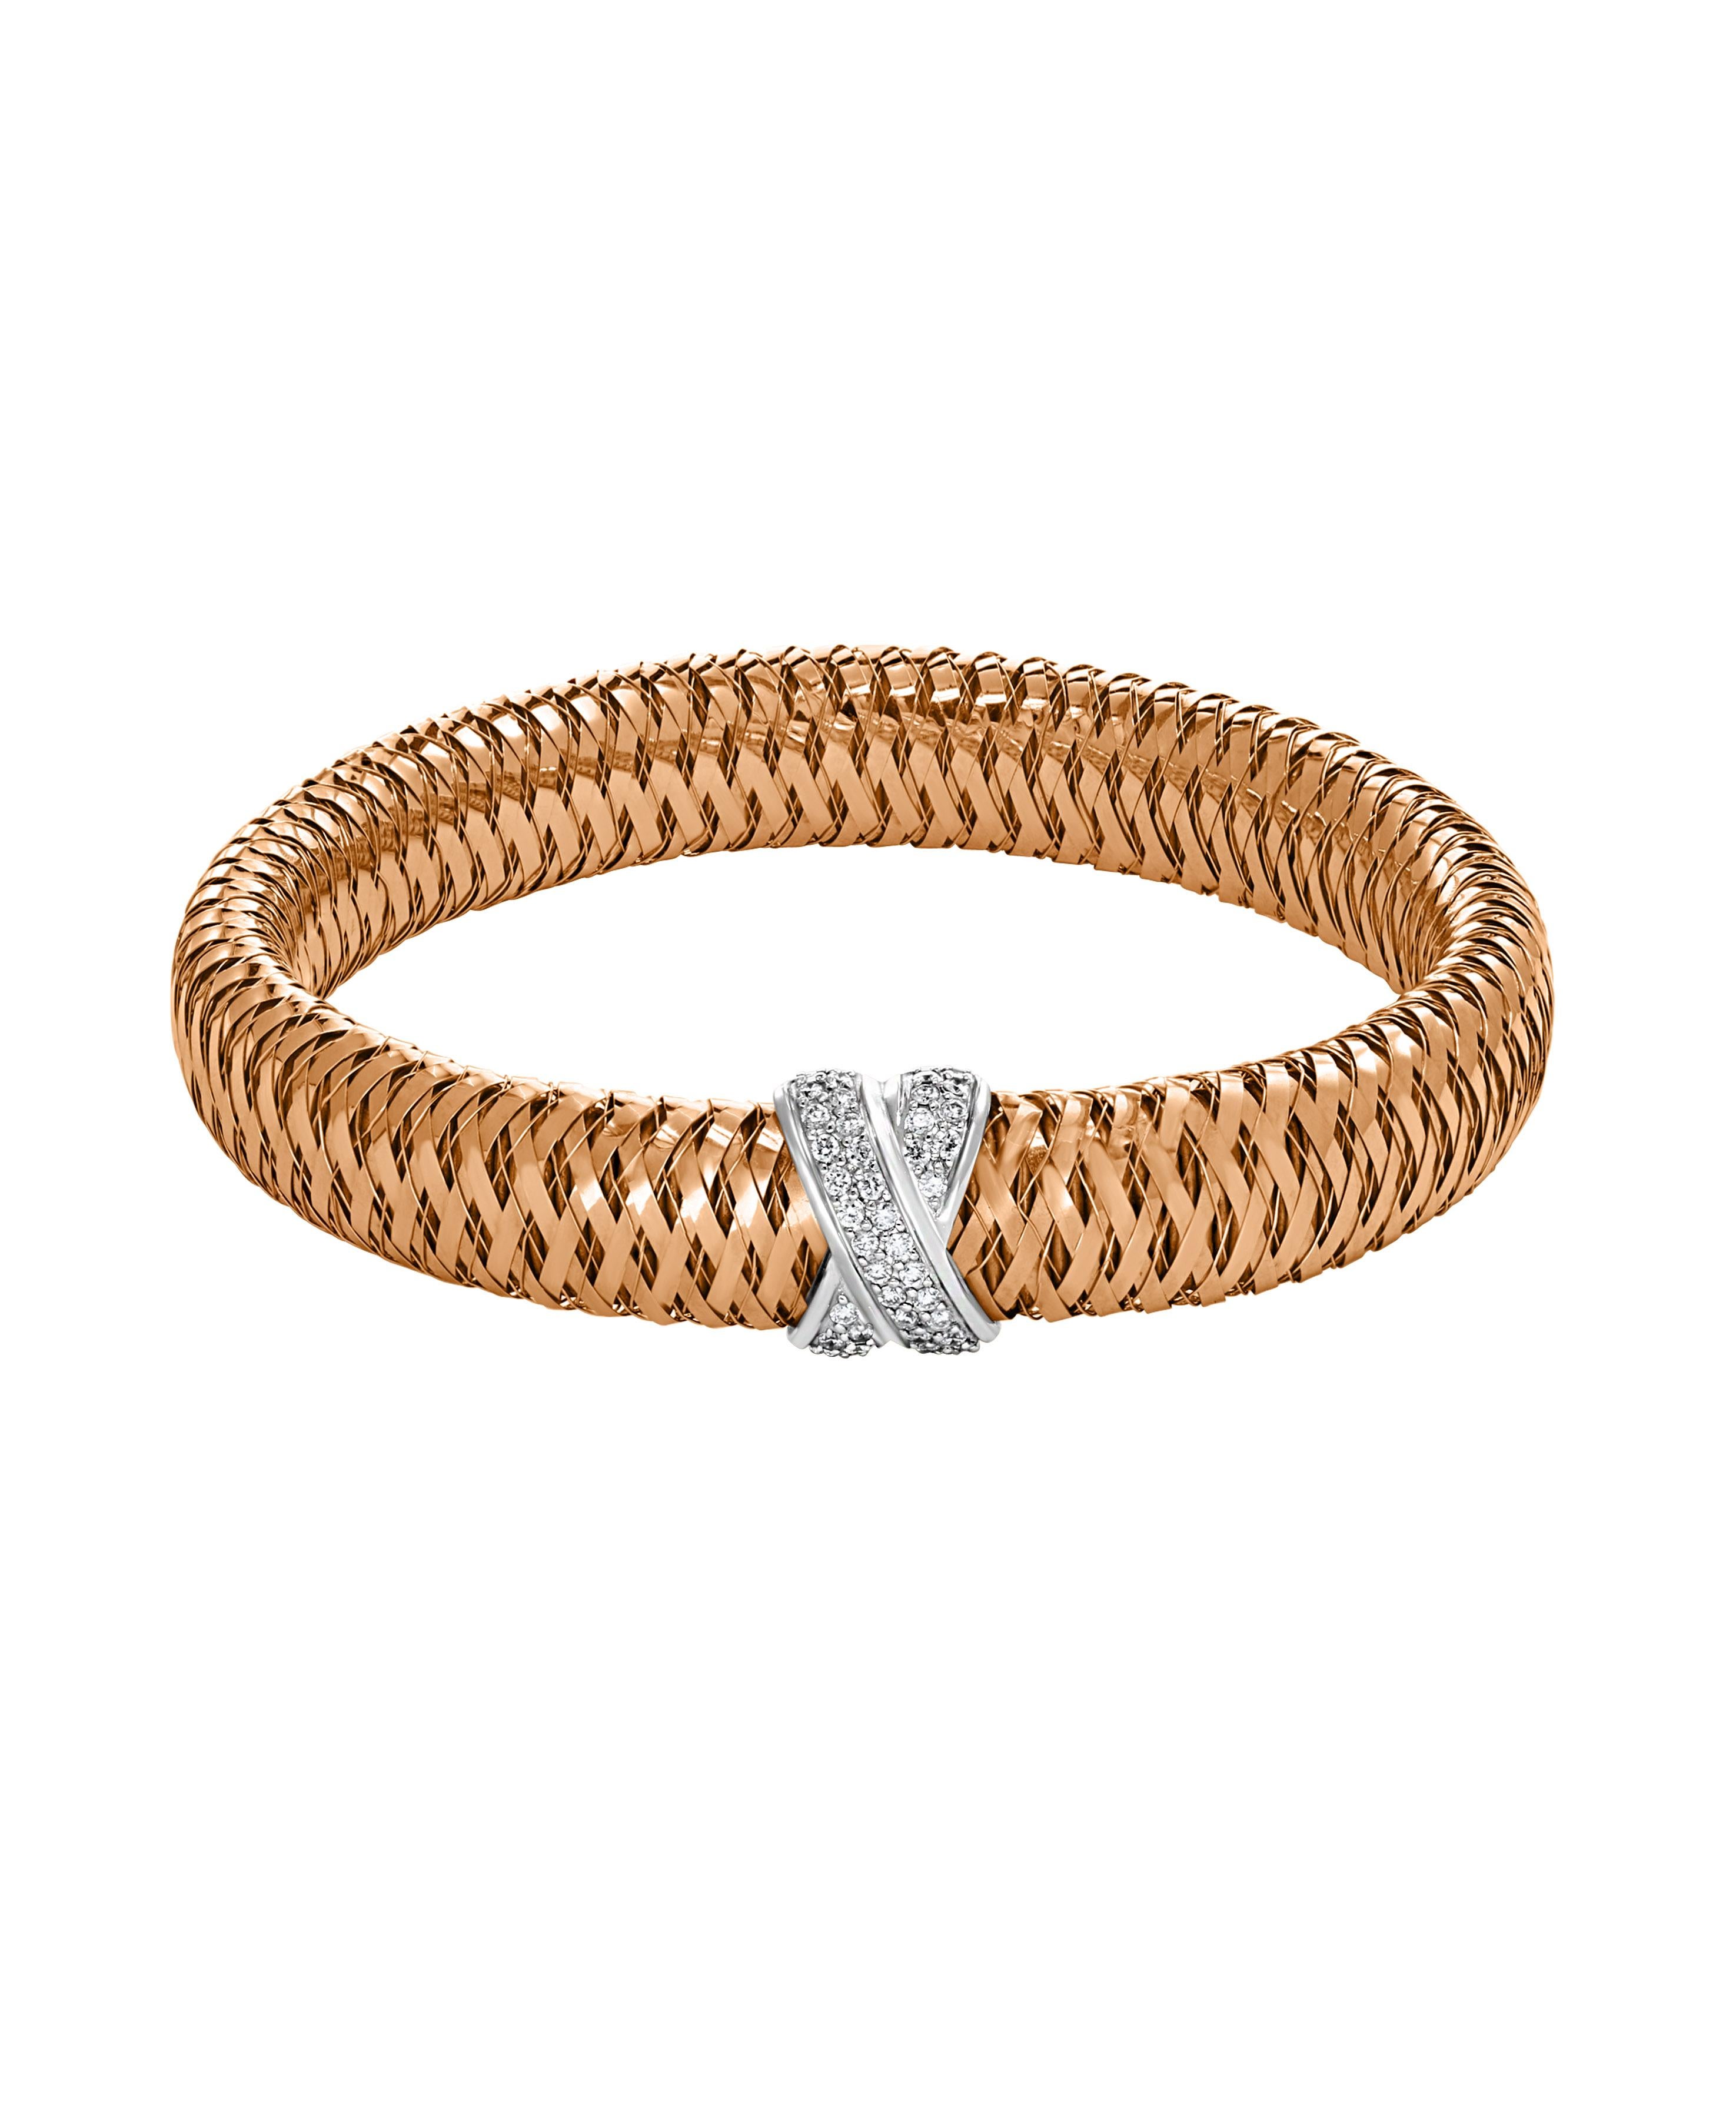 Roberto Coin Diamond  Bangle  Stretchable Bracelet  18 Karat Rose  Gold Estate
This is a stretchable bracelet so does not have any clasp  .
Diamonds : Approximately 1 Carat
18K Rose  gold  : 29 Grams
It features a bangle style  Bracelet crafted from